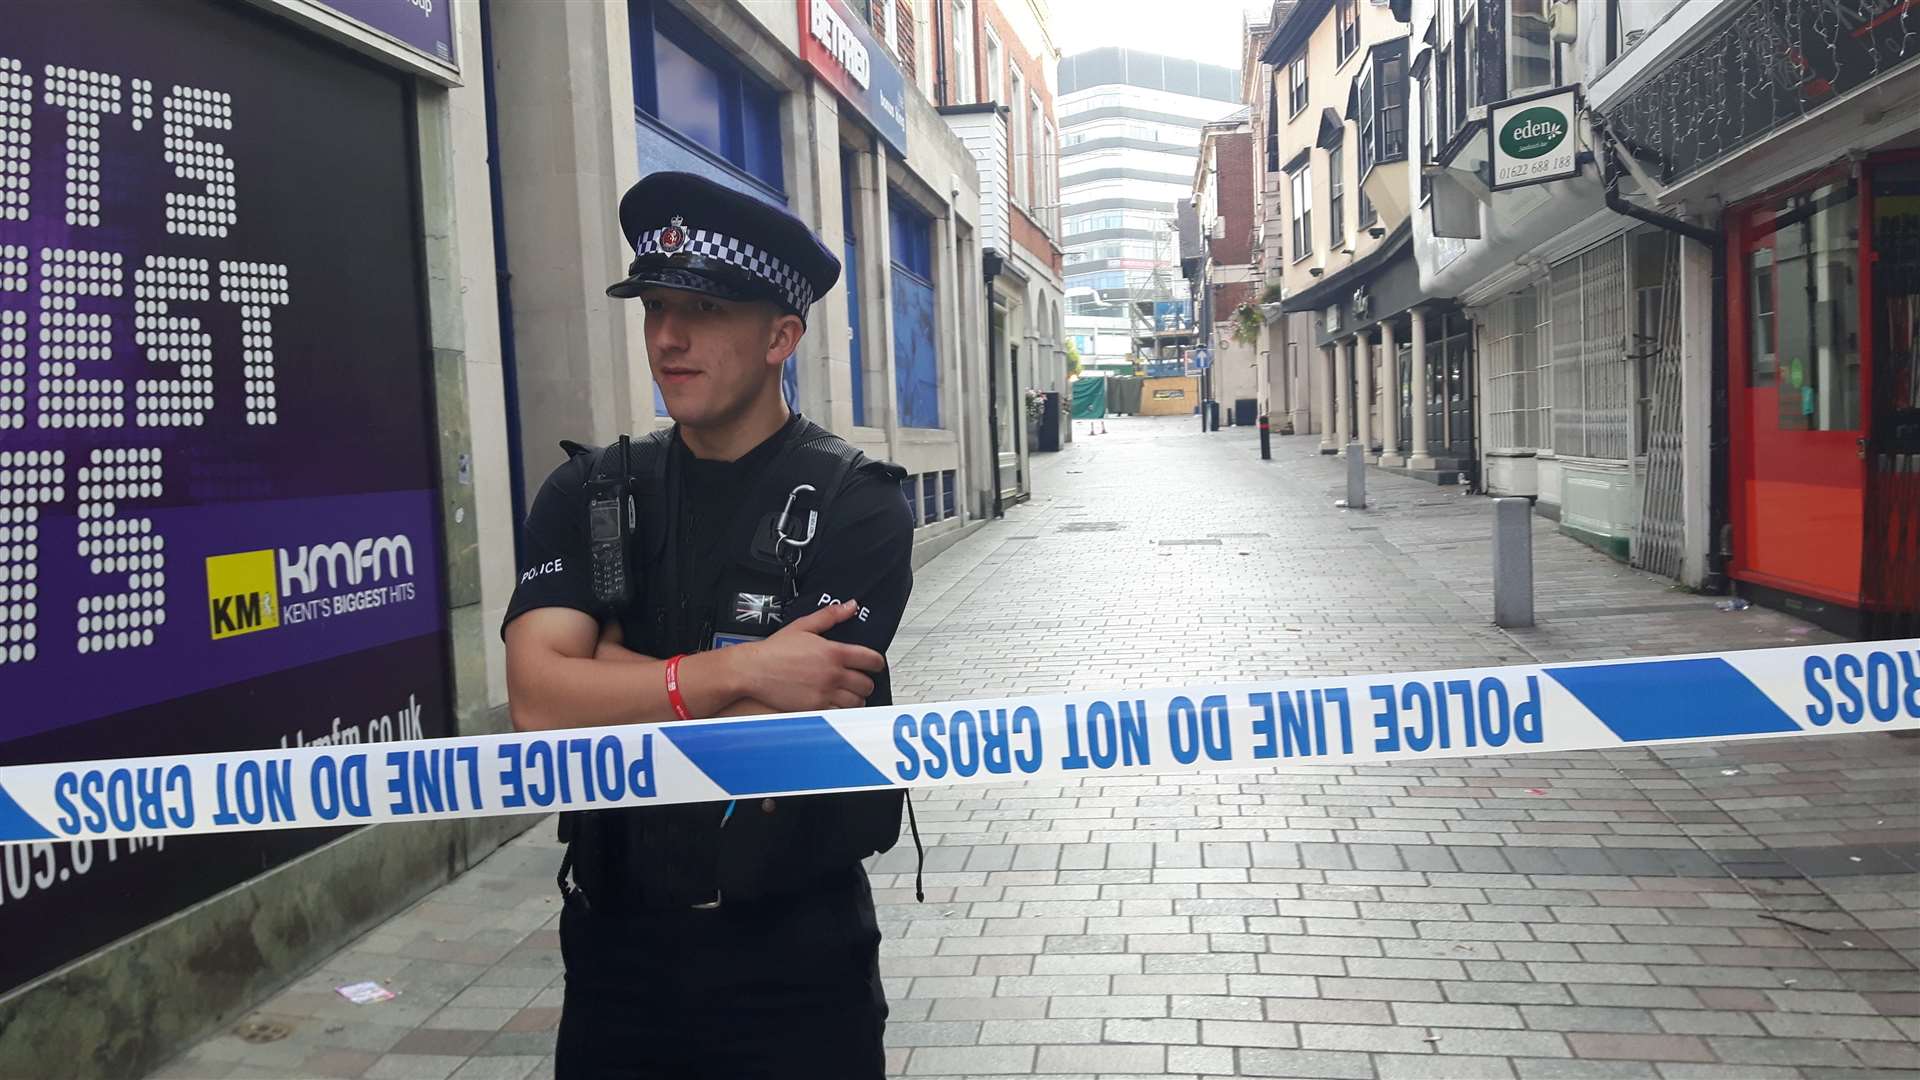 Police at the scene of a suspected murder in Maidstone town centre (15735247)